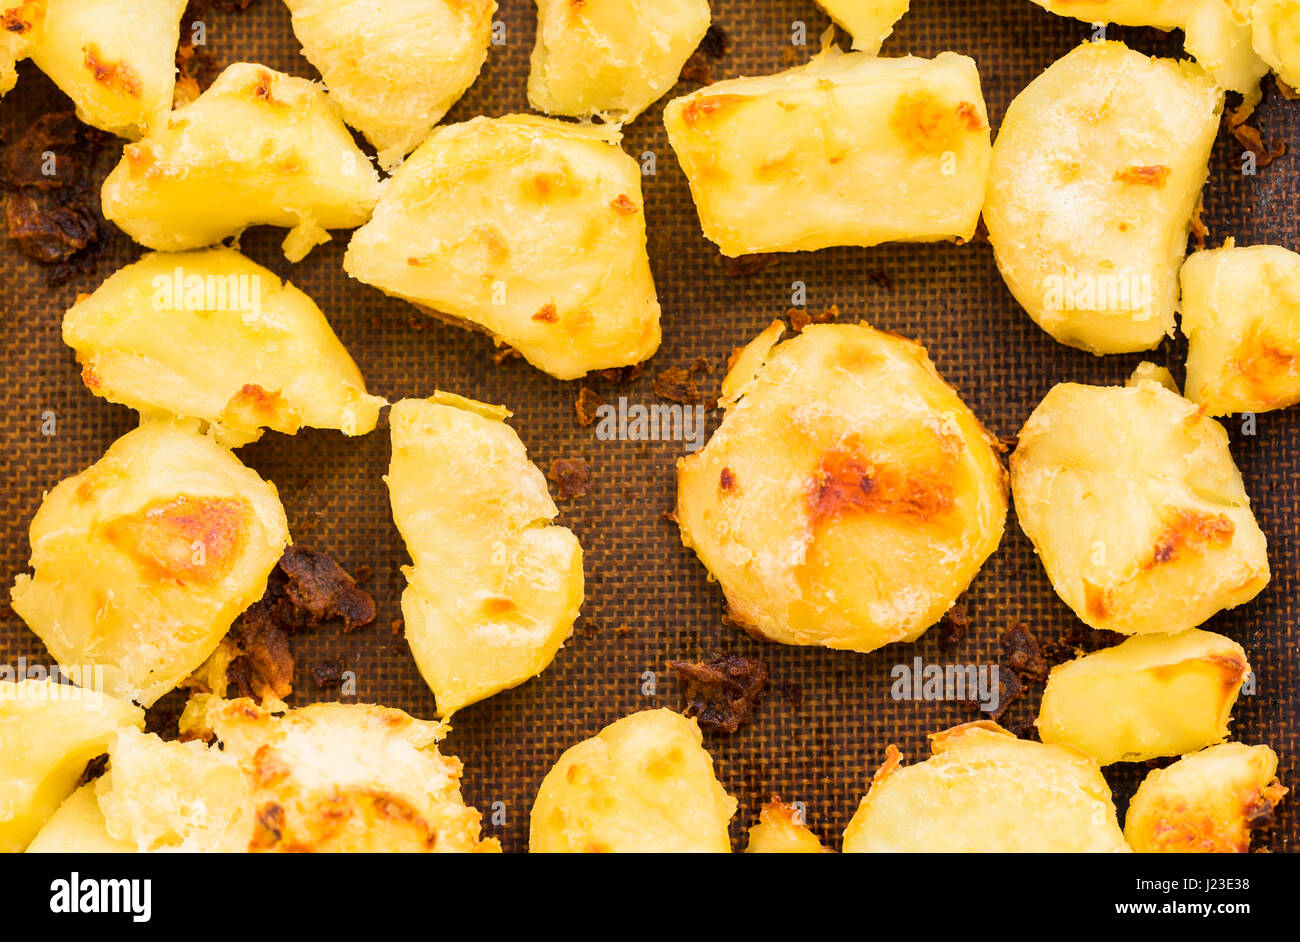 Roast potatoes from above close up Stock Photo